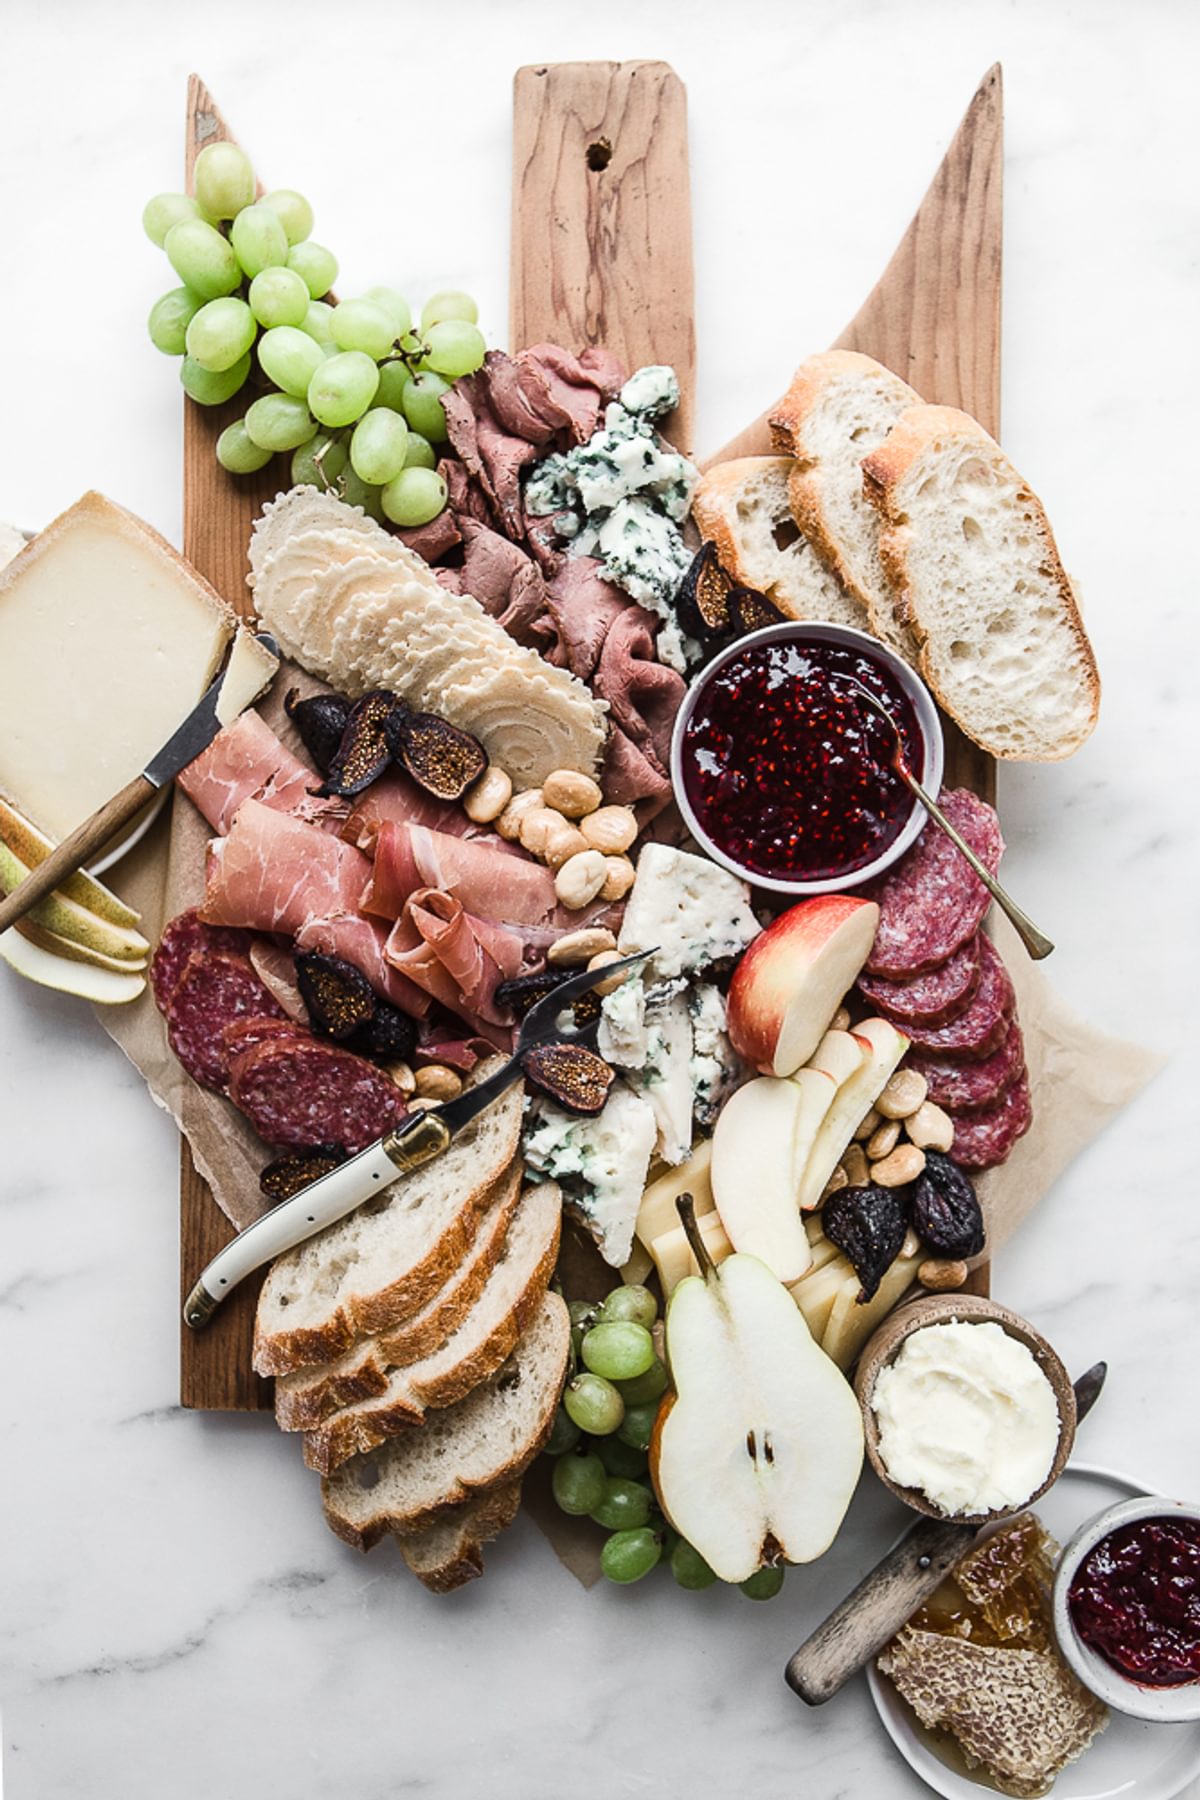 Cheese charcuterie board with grapes, apples, honey, nuts and bread